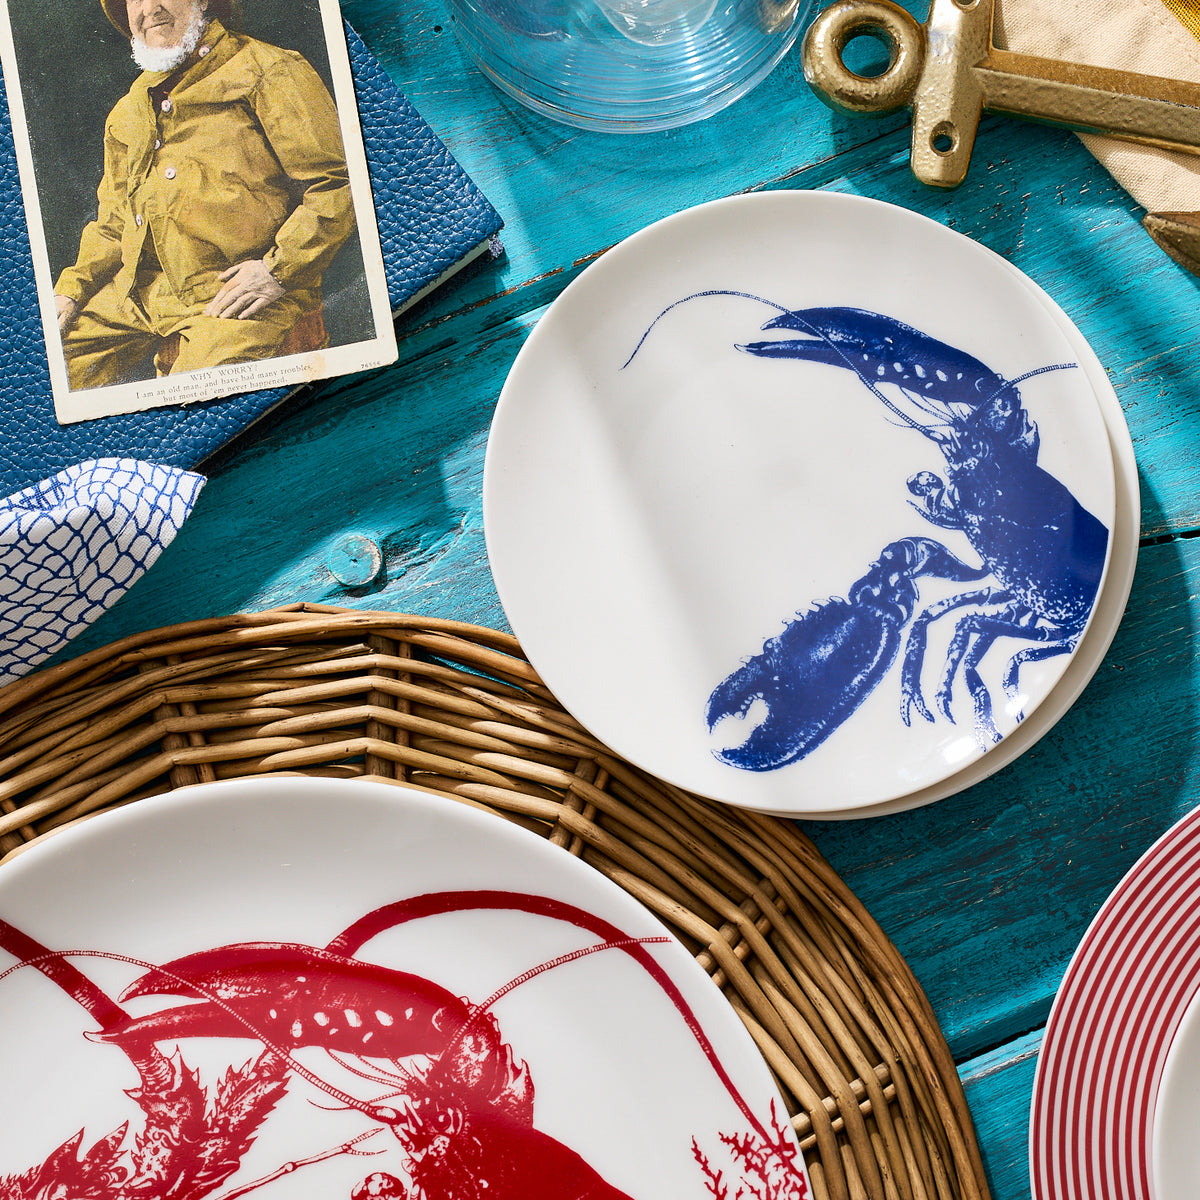 Two heirloom-quality &quot;Lobster Small Plates&quot; by Caskata Artisanal Home, one with a red lobster and the other with a blue lobster design, sit on a blue table with a rattan placemat and a photograph of a person in vintage clothing. This seaside style dinnerware adds a charming touch to any coastal-themed dining experience.